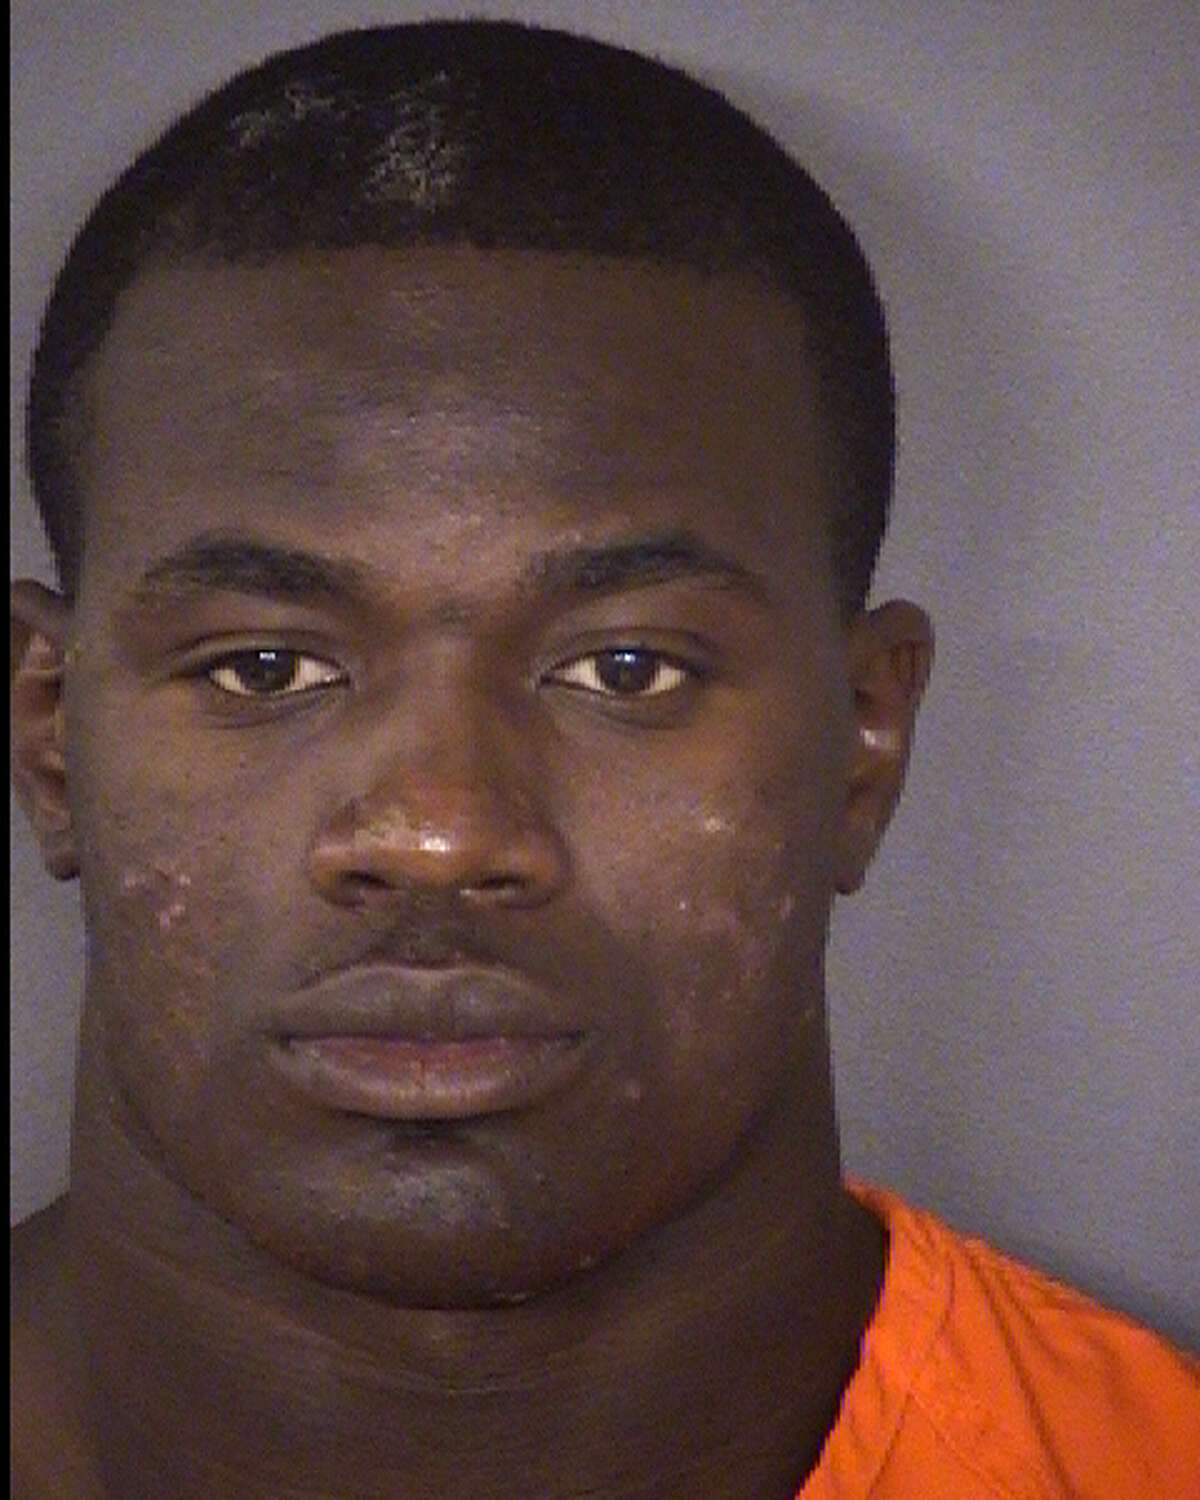 Adefemi Adekeye, 21, was arrested Wednesday night on a charge of aggravated robbery.